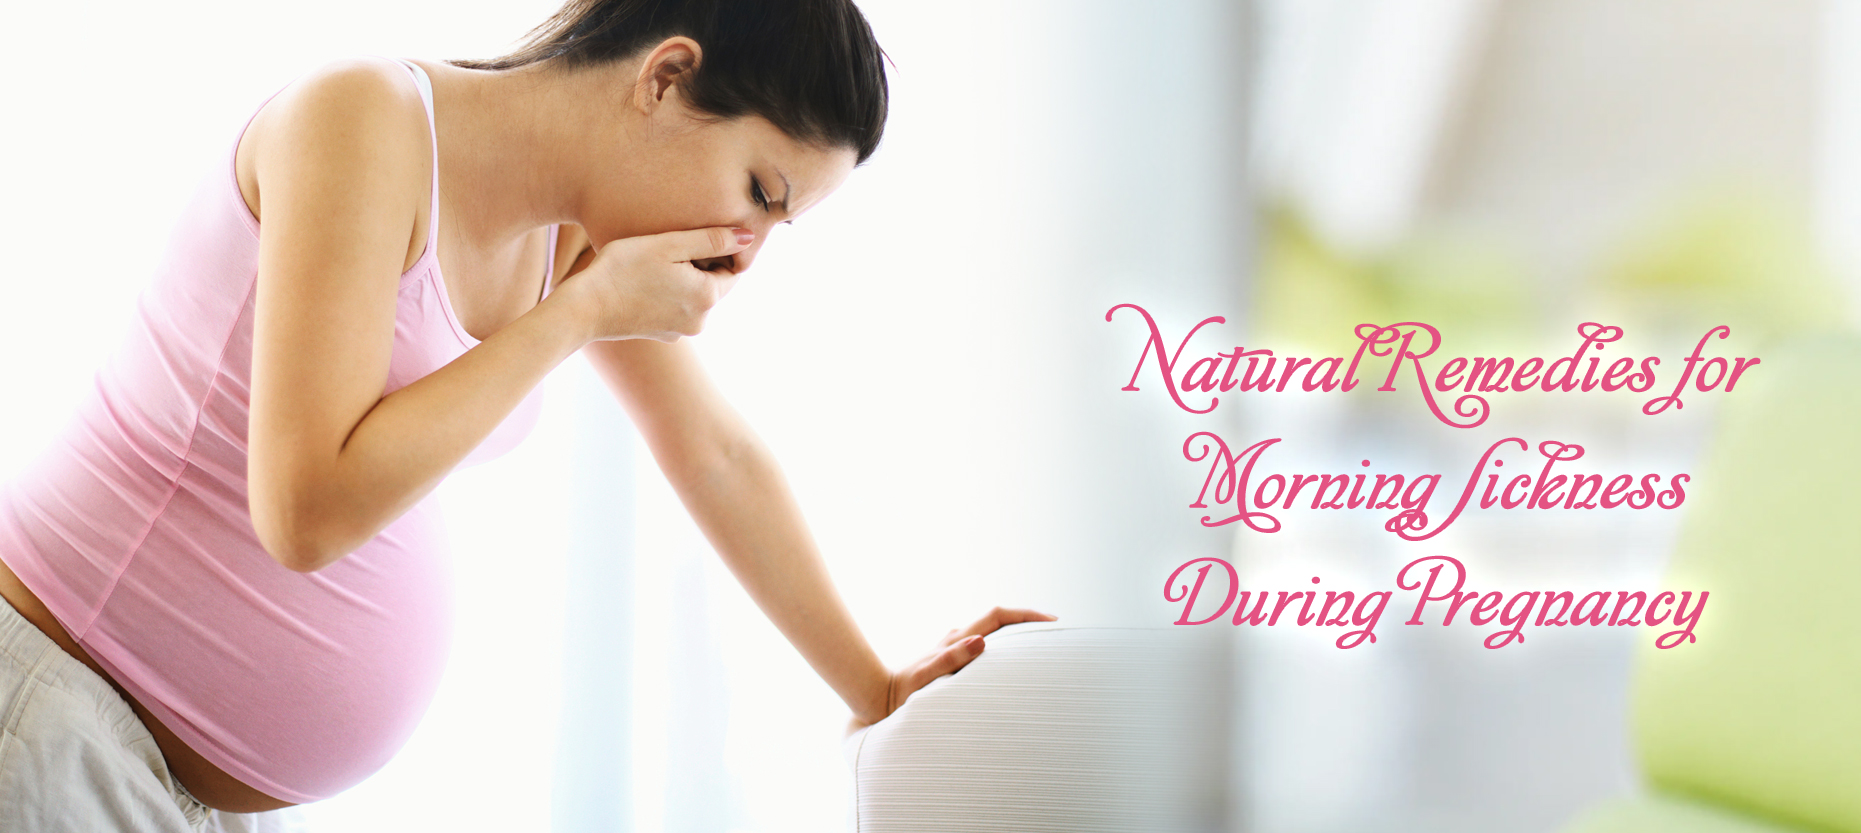 Natural Remedies For Morning Sickness During Pregnancy